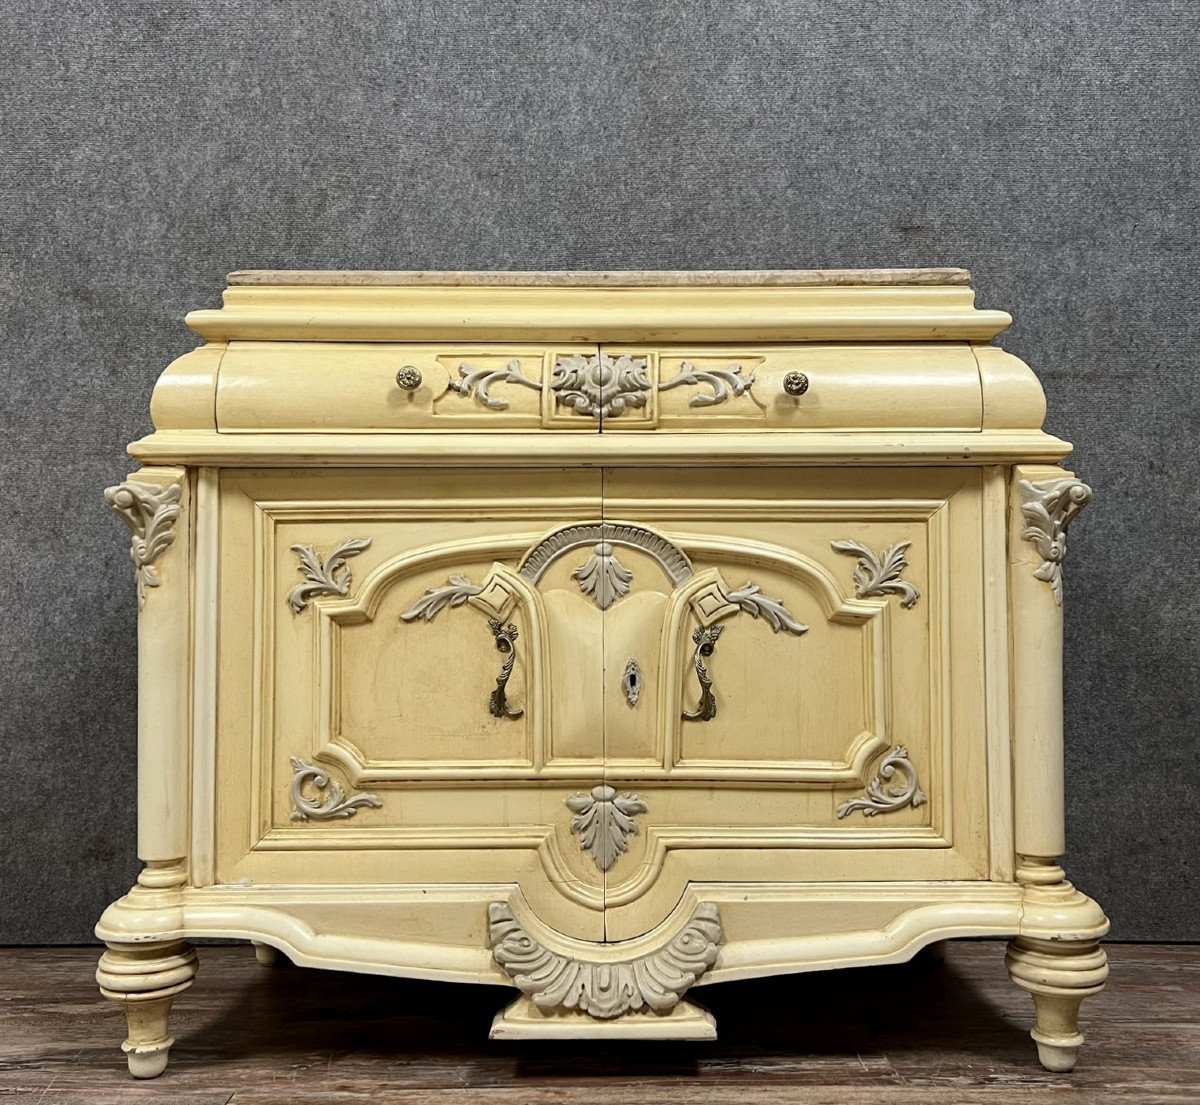 Atypical Venetian Baroque Commode With Doors In Lacquered Wood